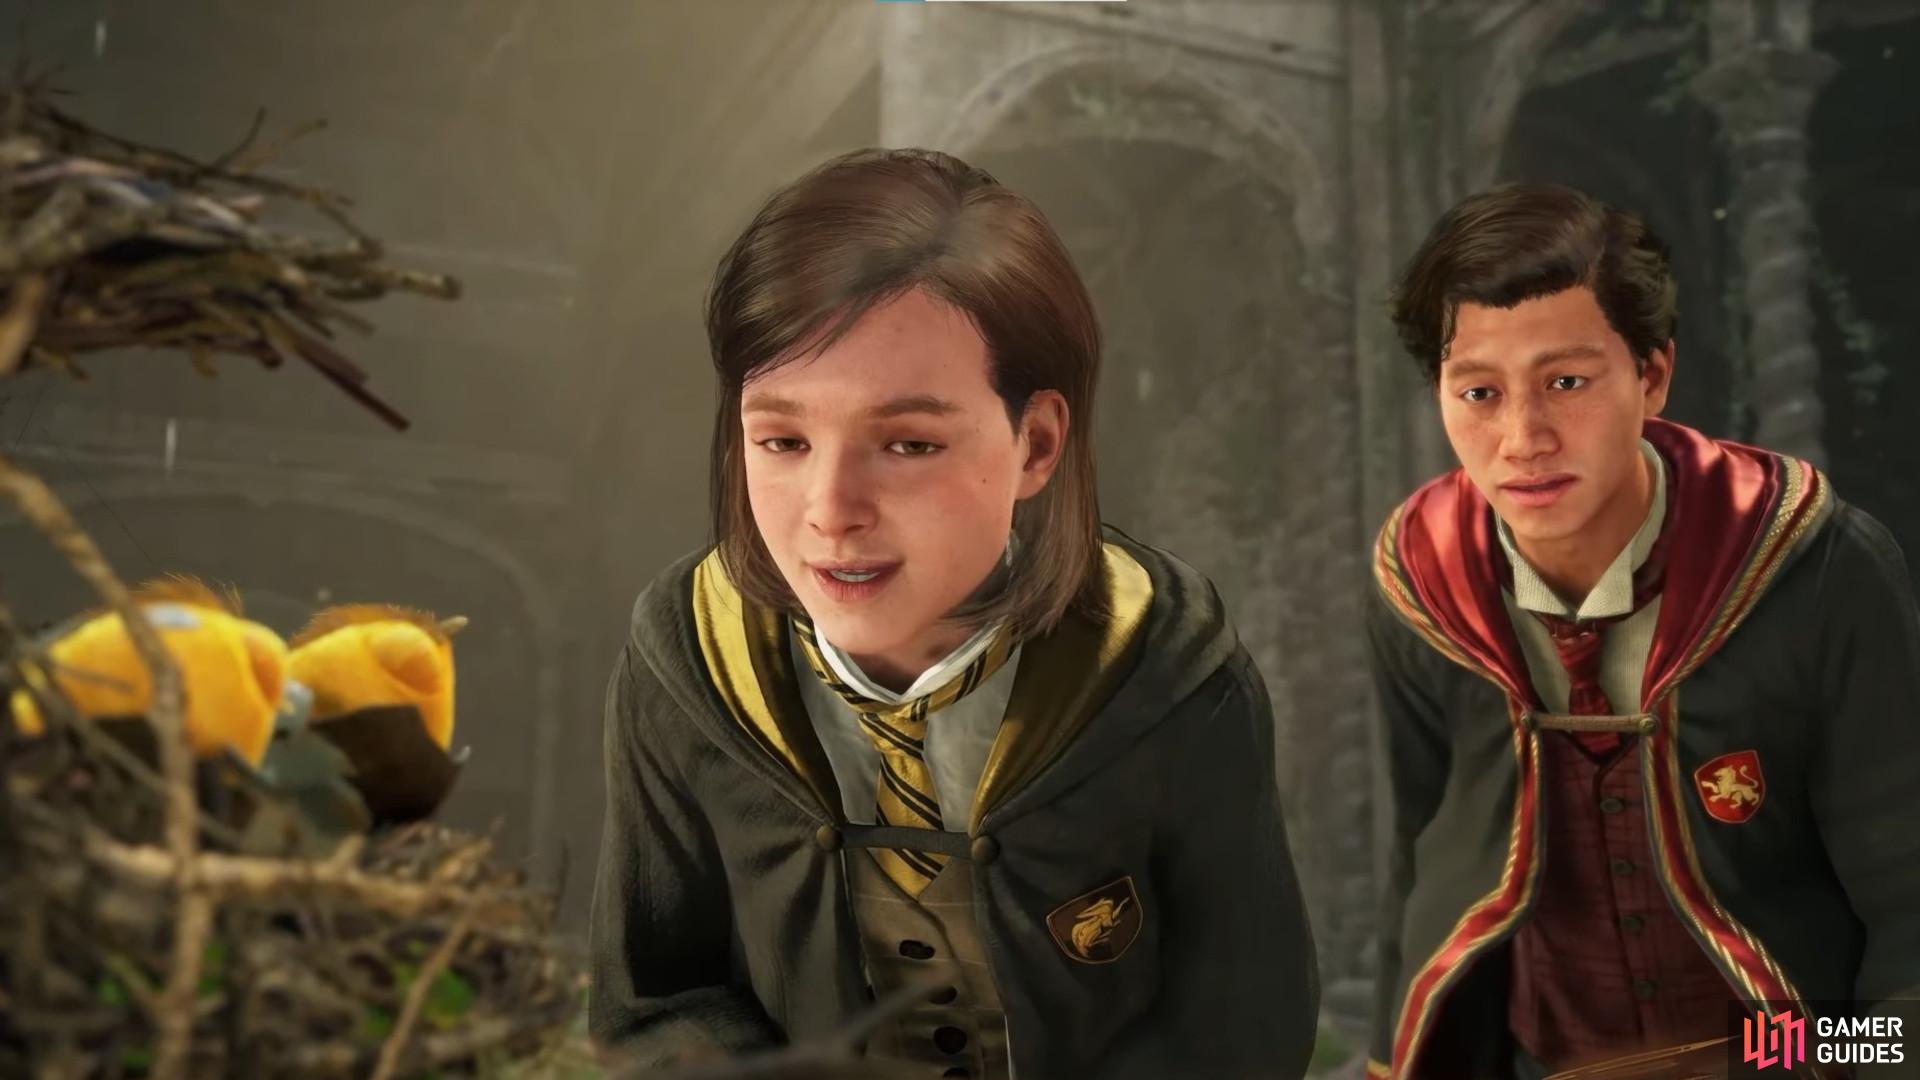 Here's a closer look at the Hogwarts Legacy Companions and how the feature works. Image via Warner Brothers.